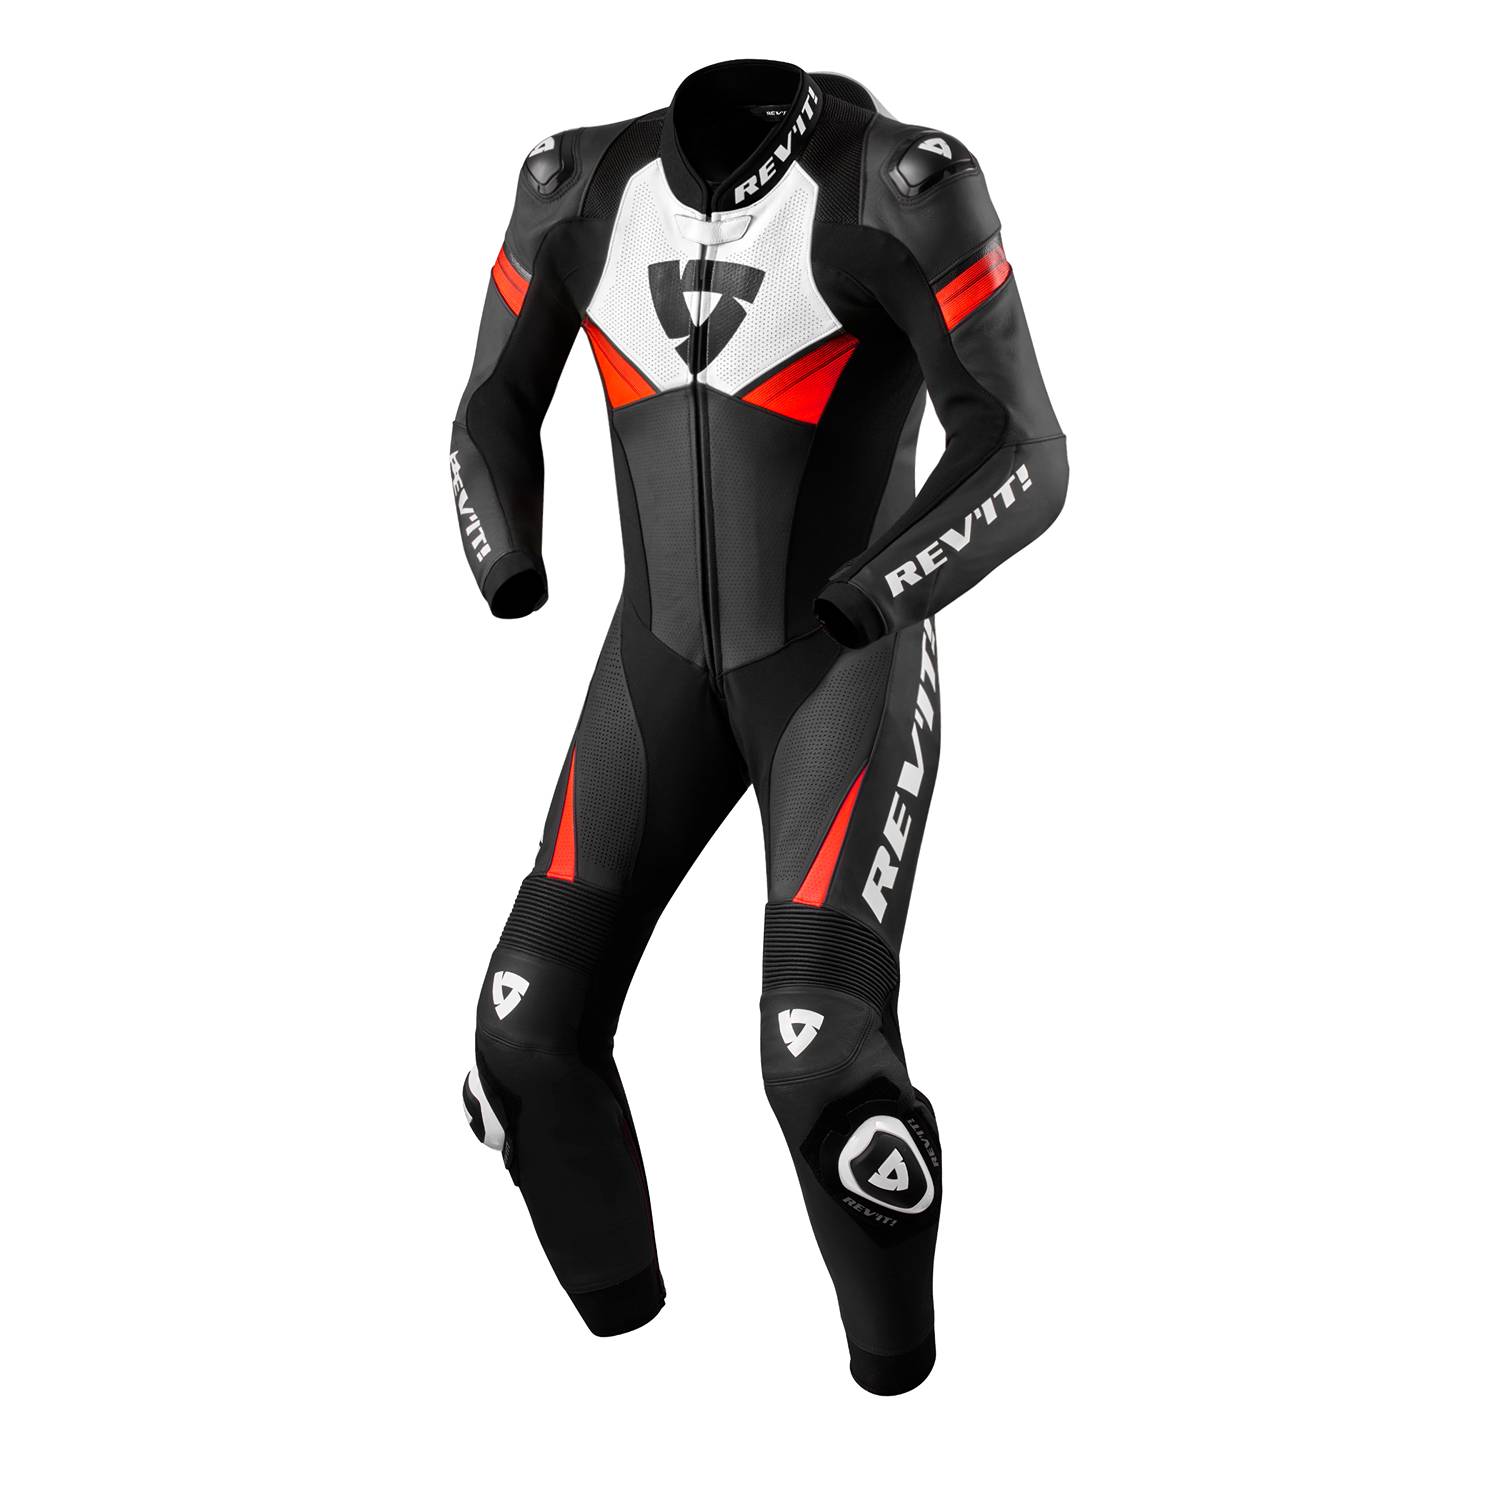 Image of REV'IT! Argon 2 One Piece Suit Black Neon Red Size 50 ID 8700001359610